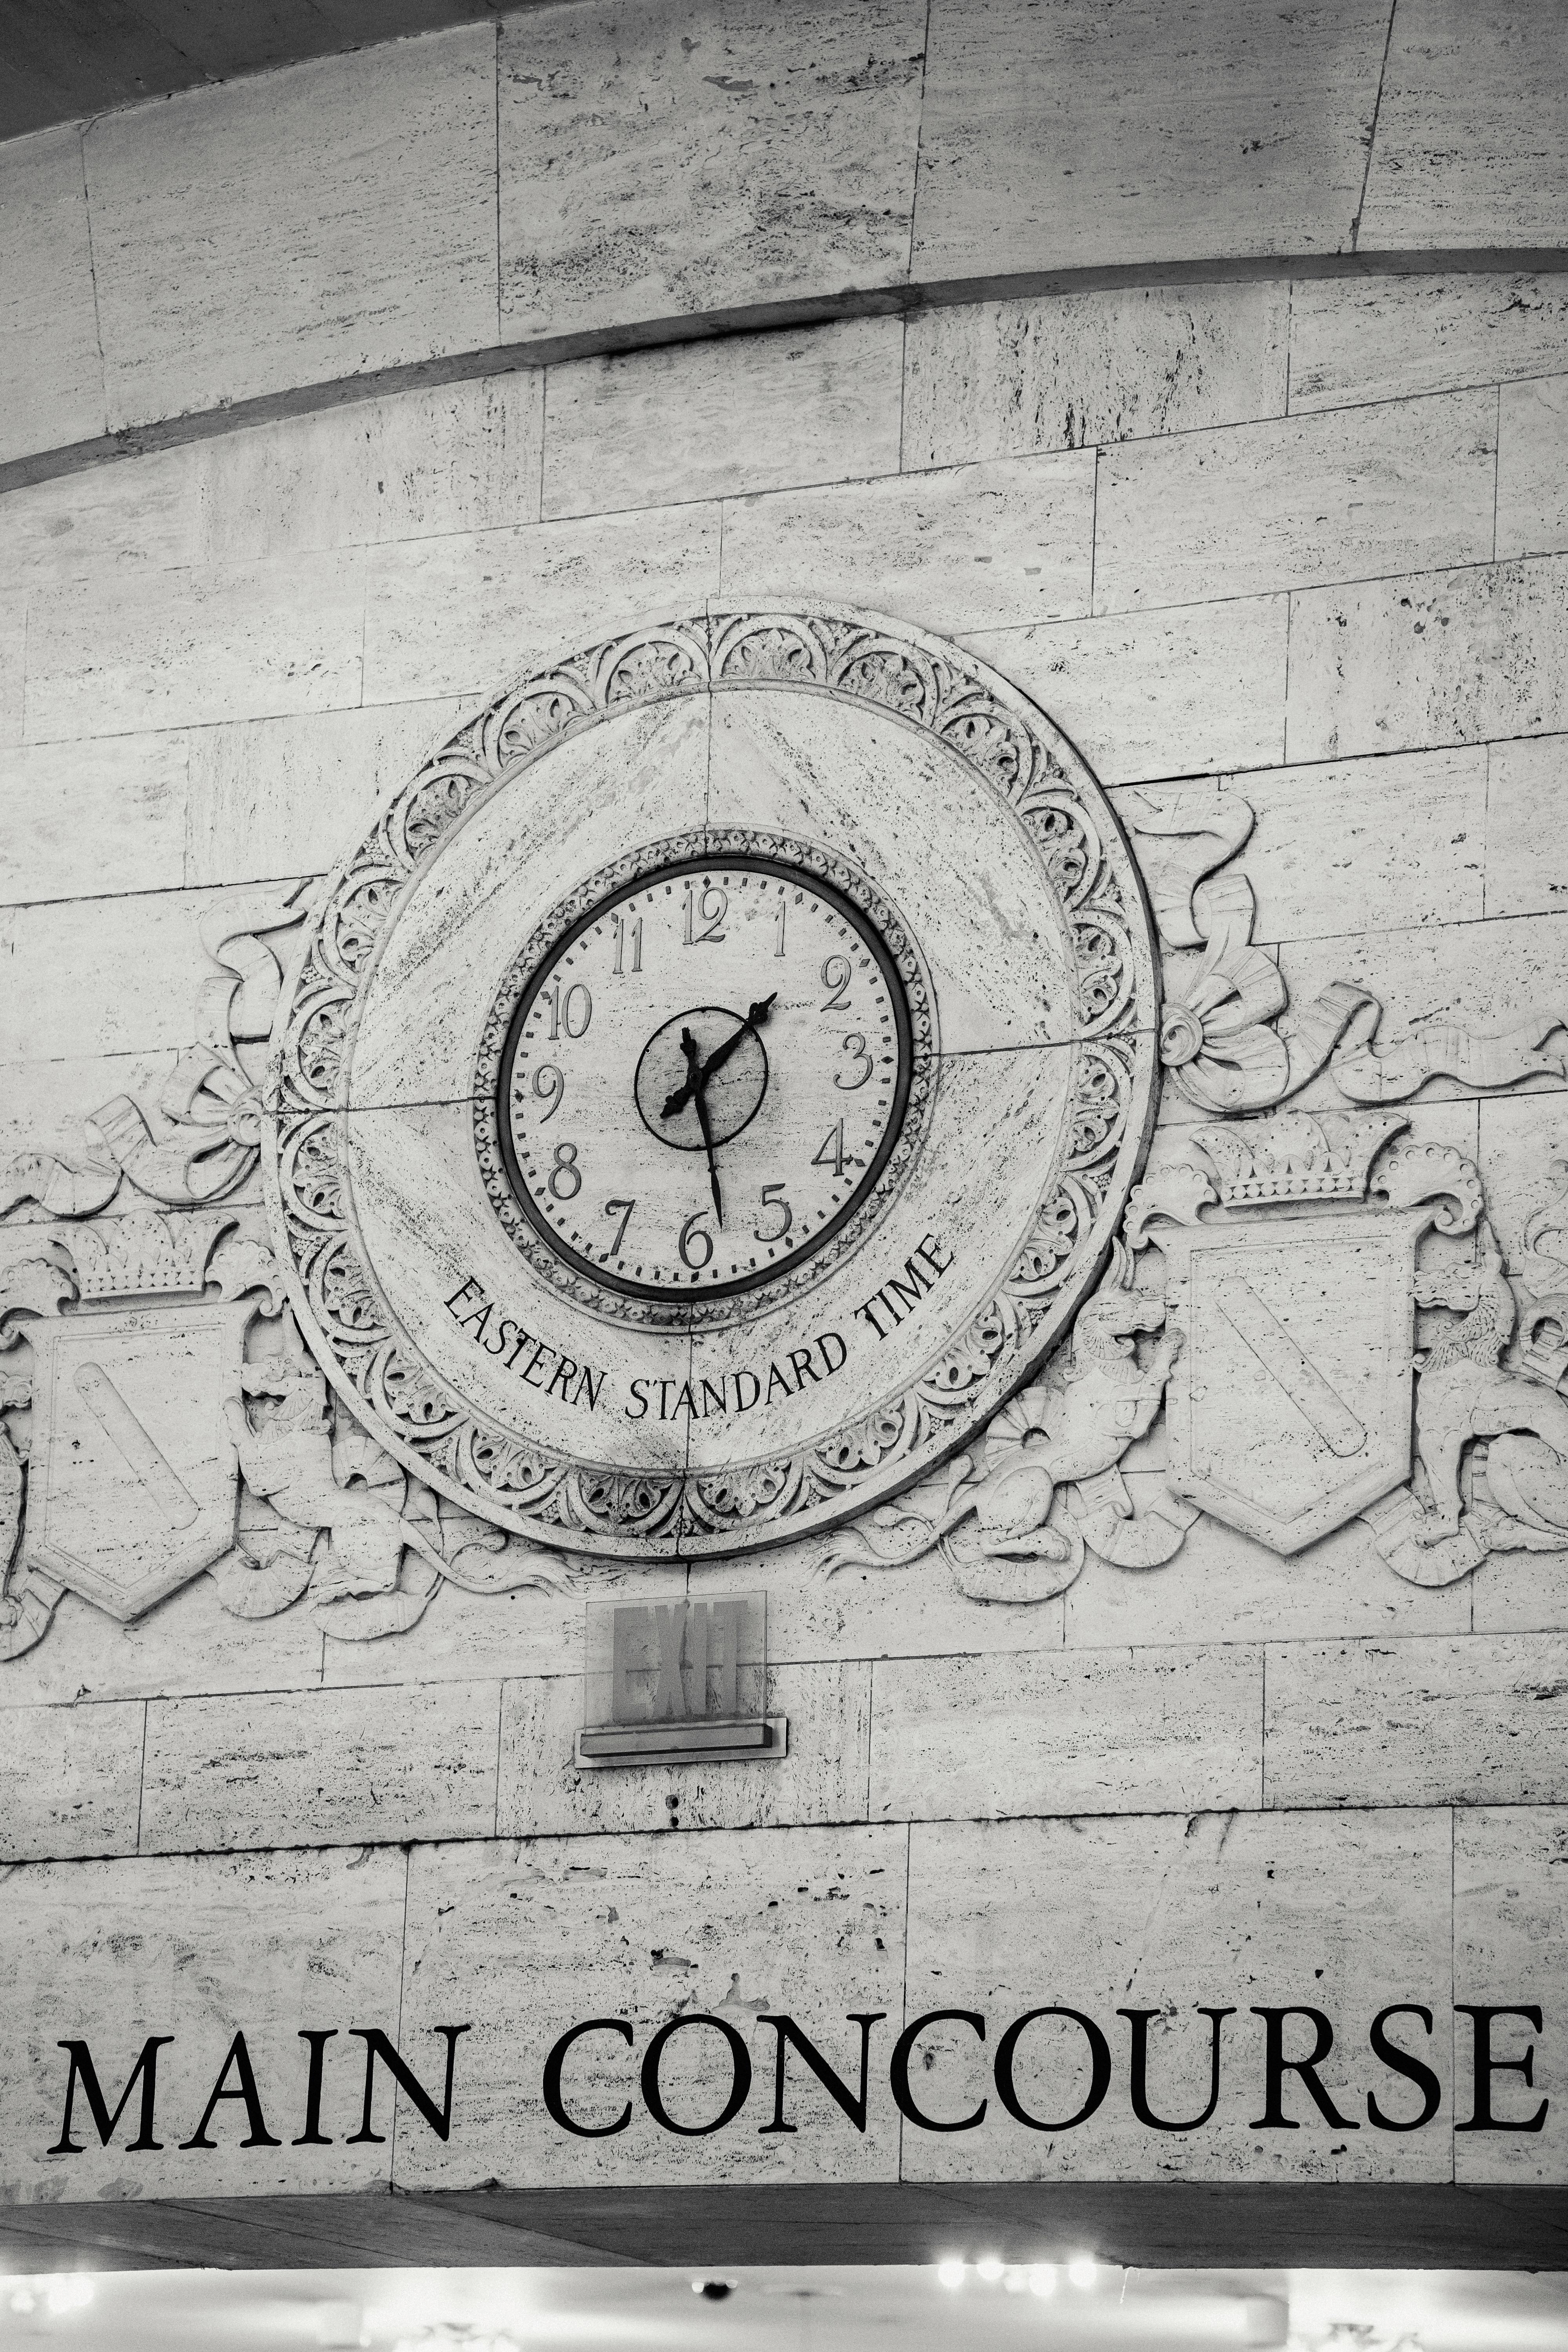 engraving of emblem with clock on stone wall